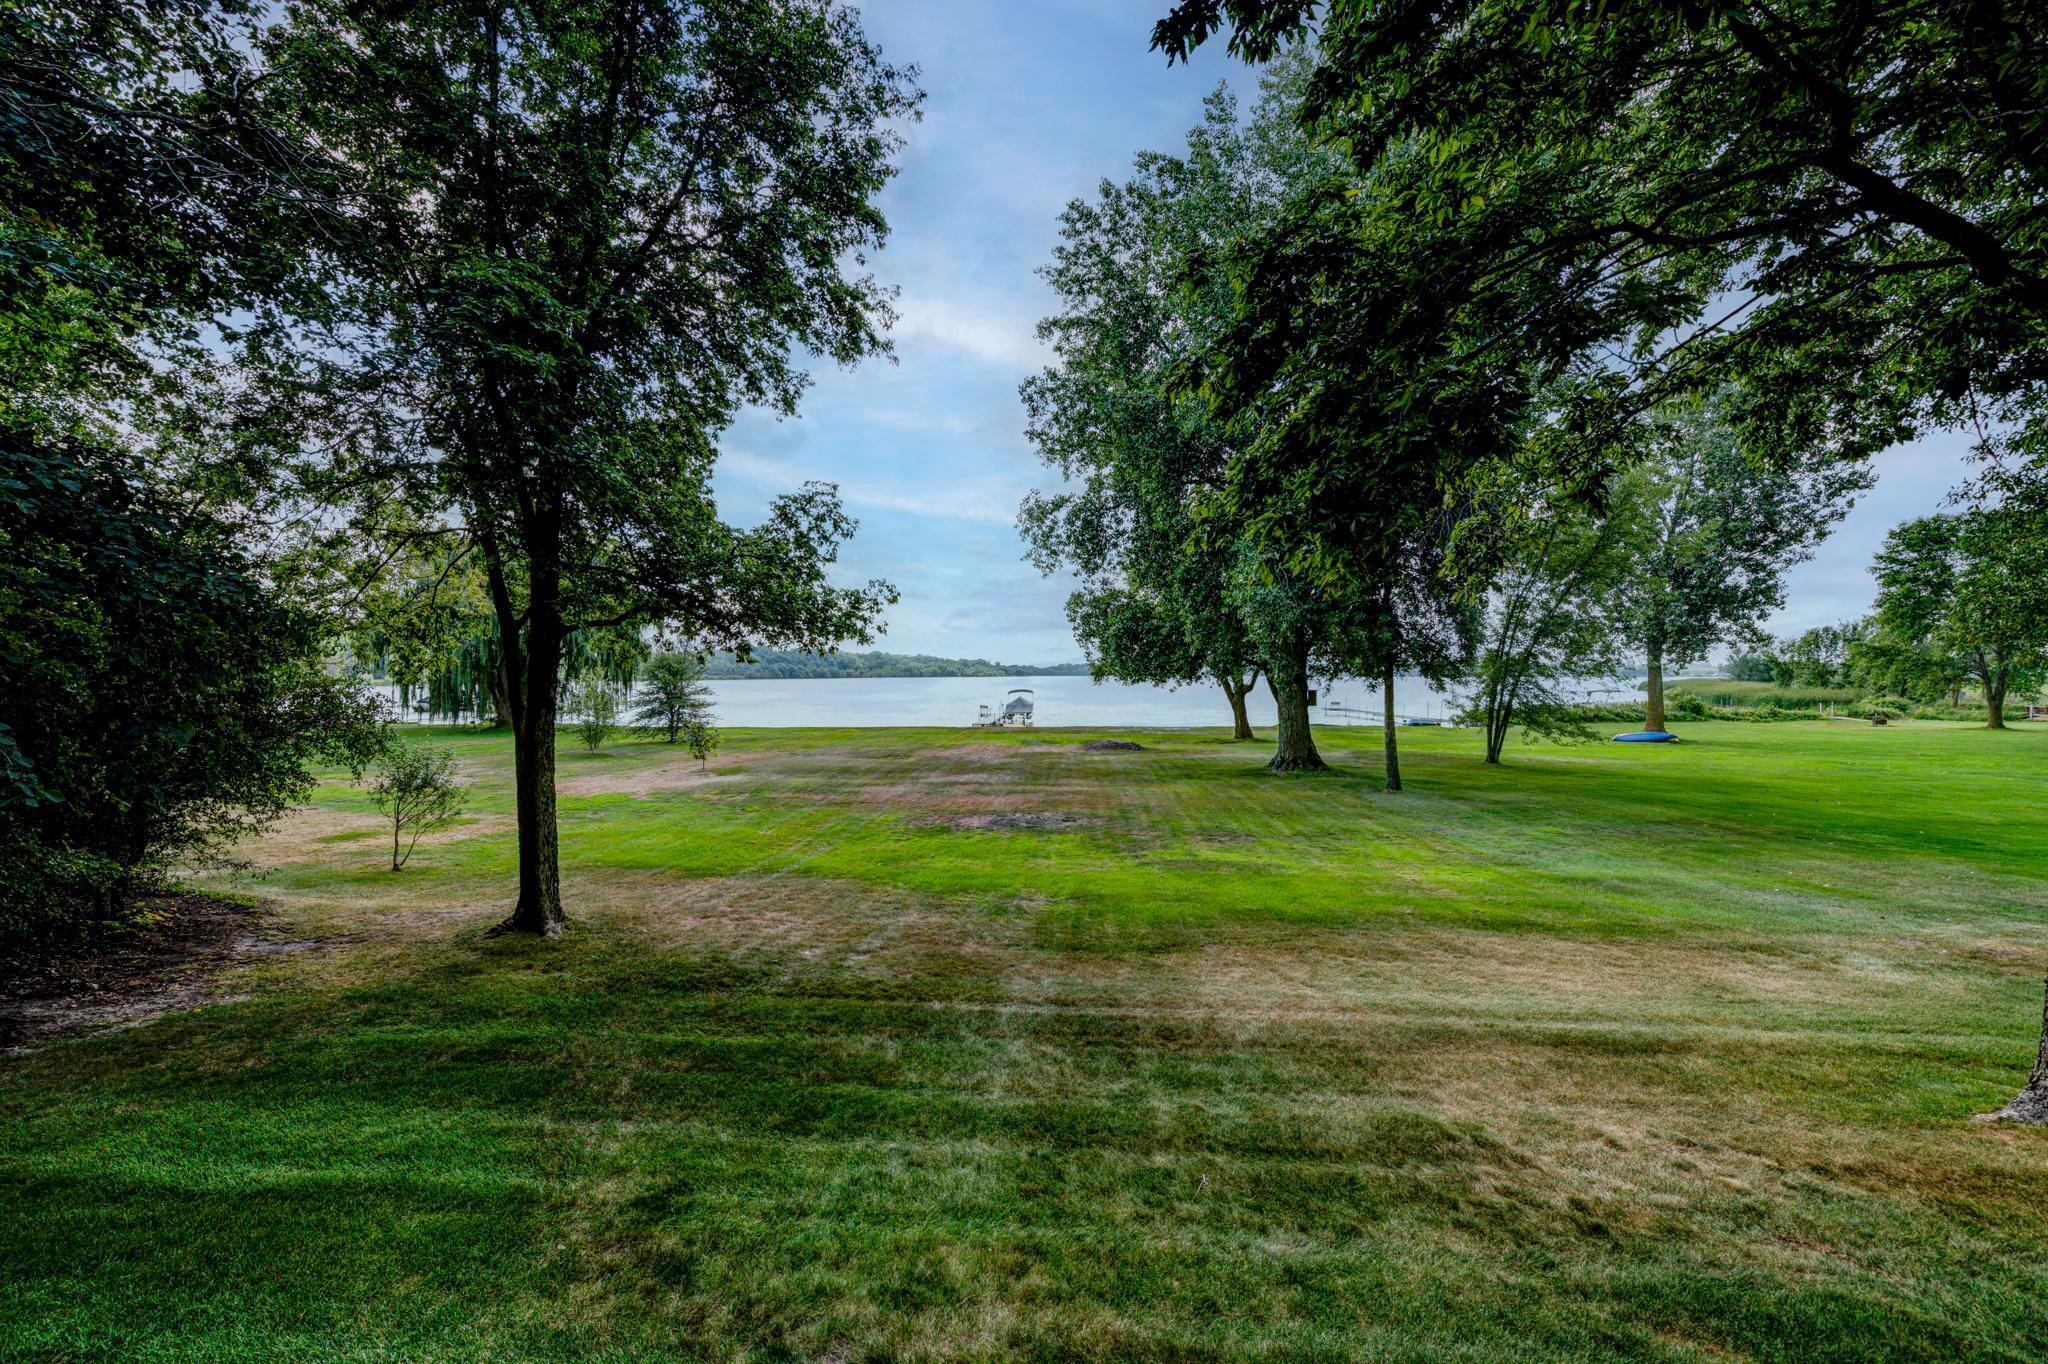 You will fall in love with the gentle slope of the yard down to the lake. There is so much usable space with this property!